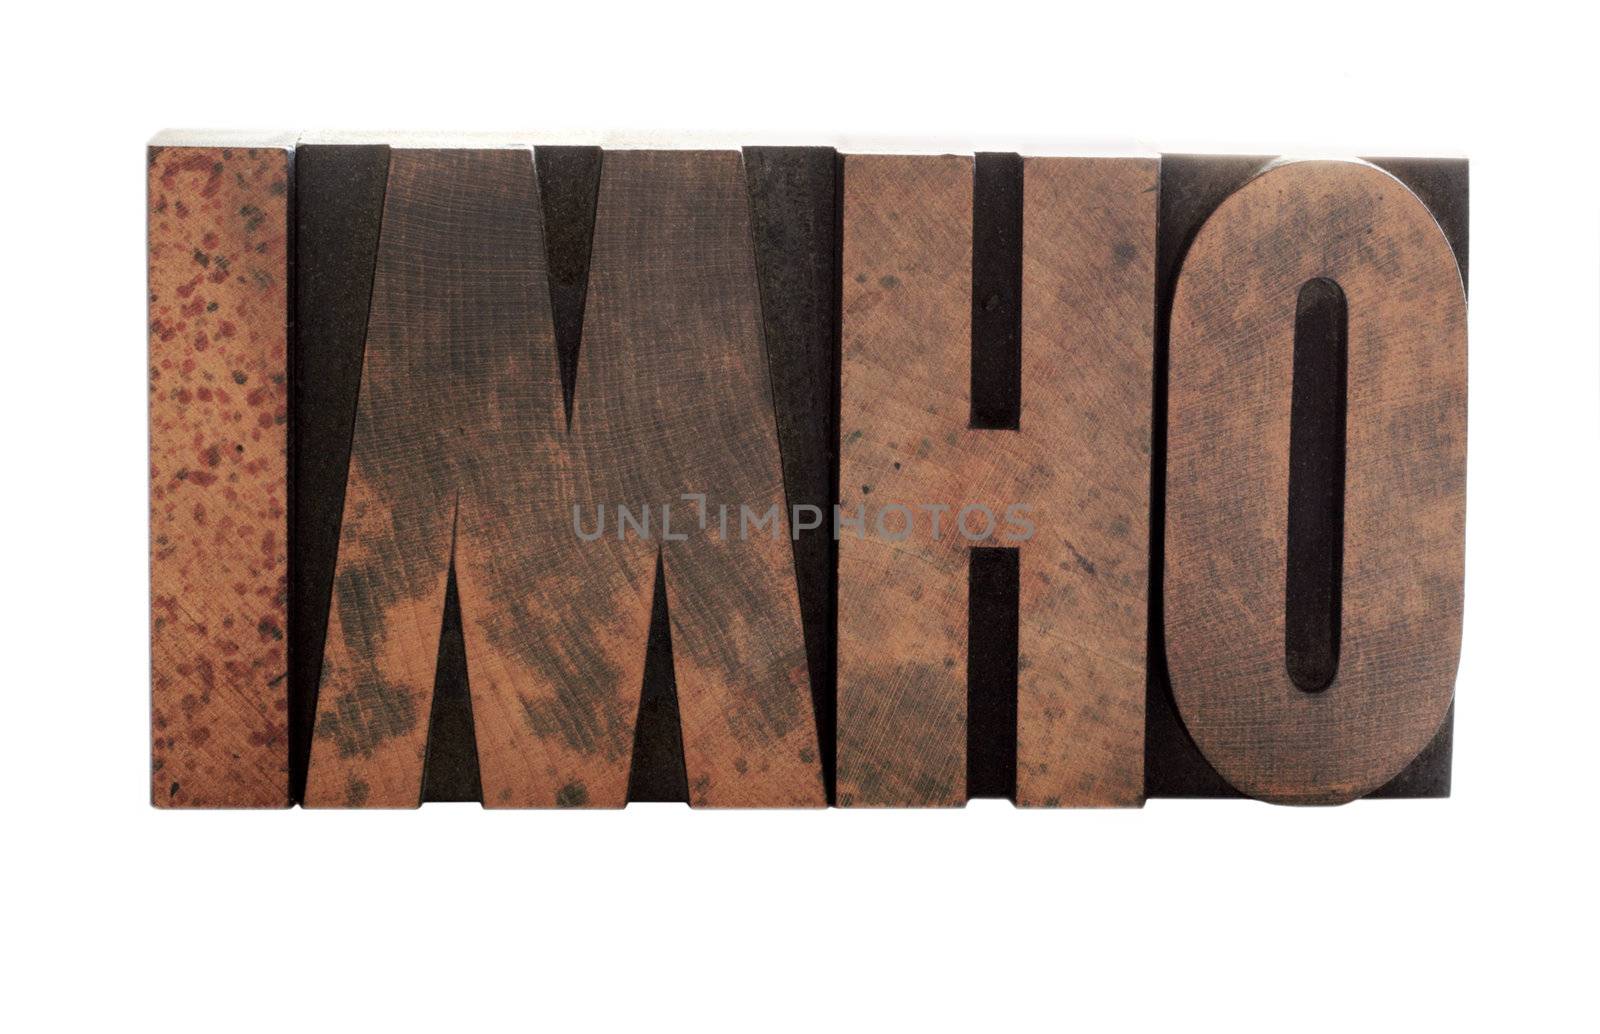 the term 'imho' in old, ink-stained wood letters